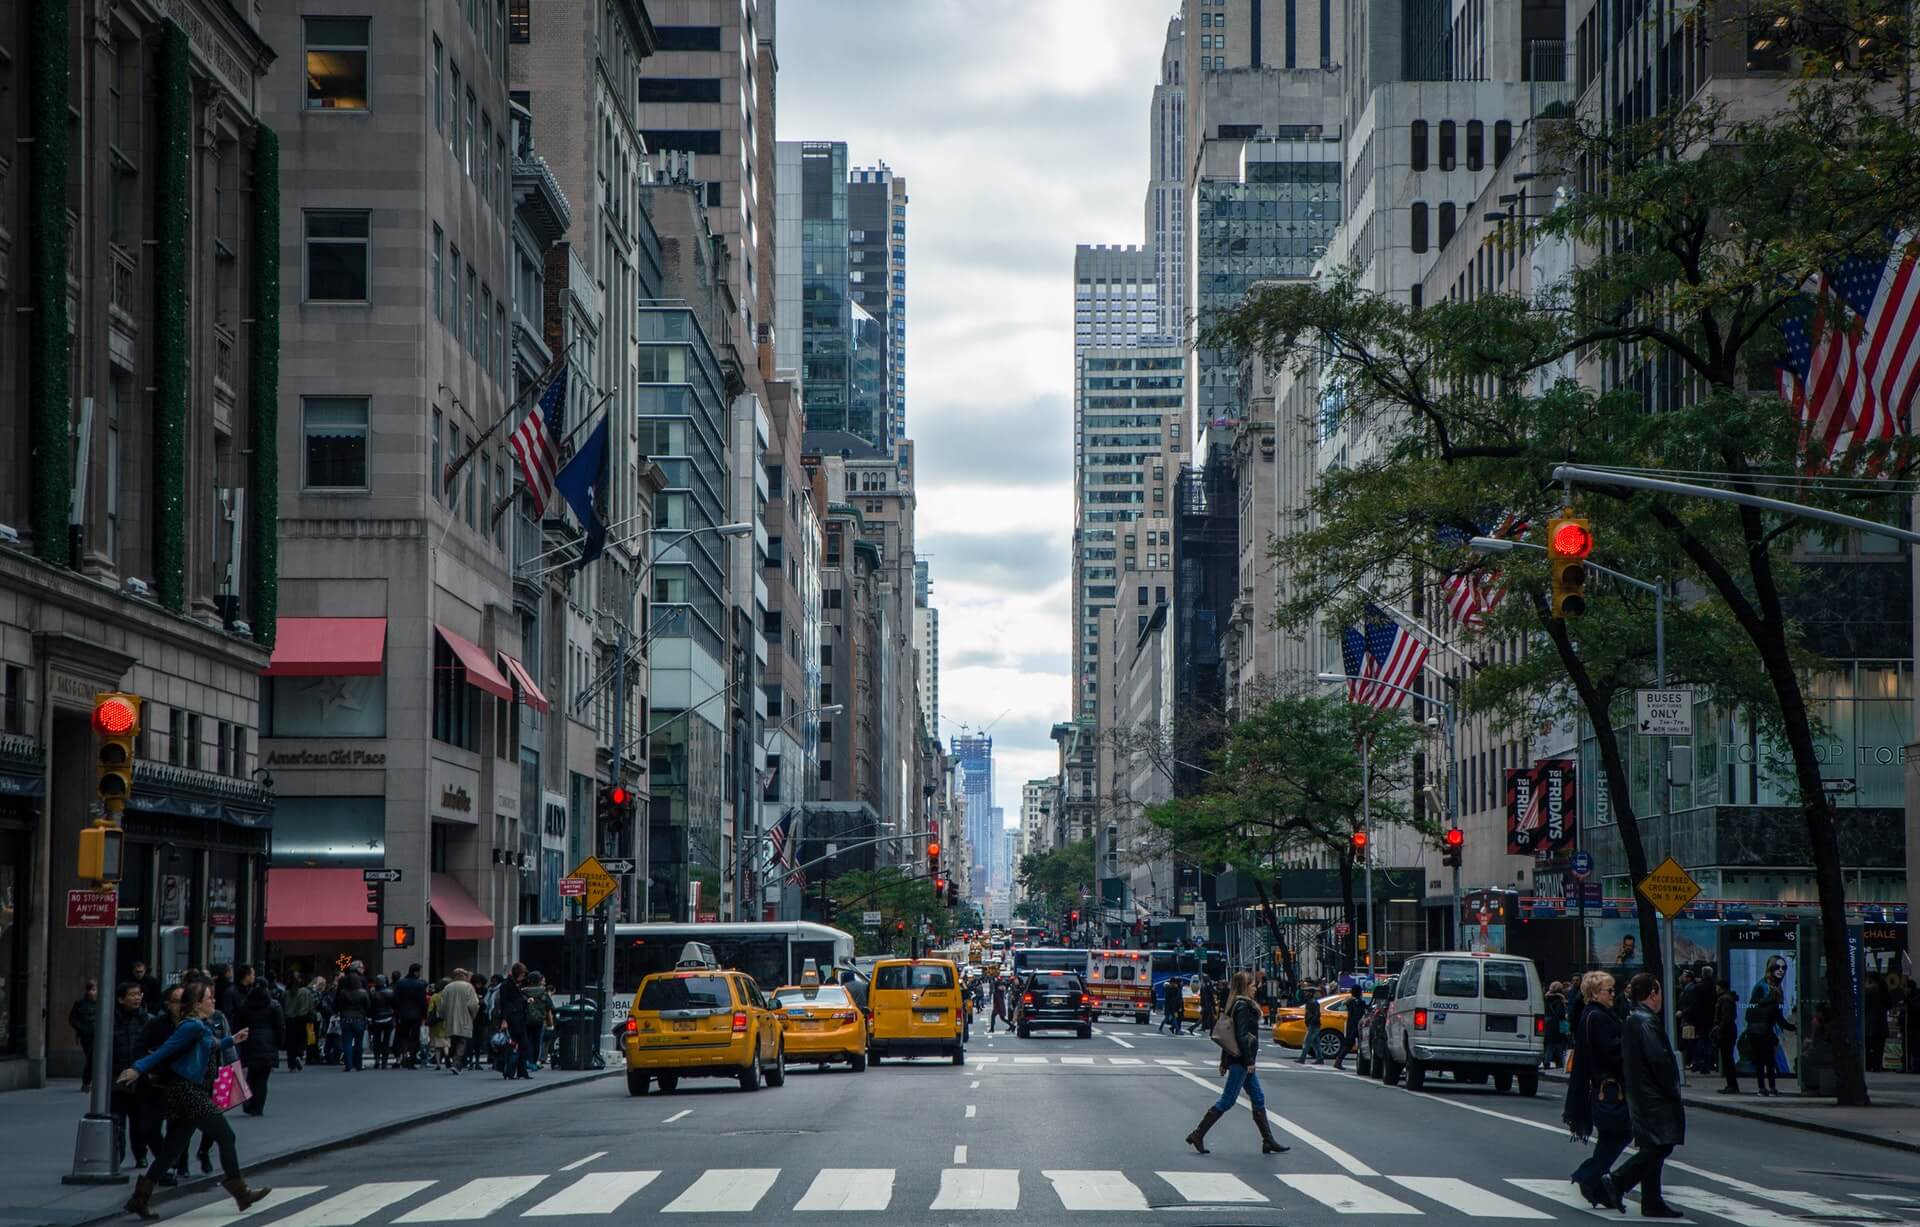 A view of a busy and hectic main street in New York City. There are lots of people walking around in all directions , there are lots of yellow taxis and cars around the road.